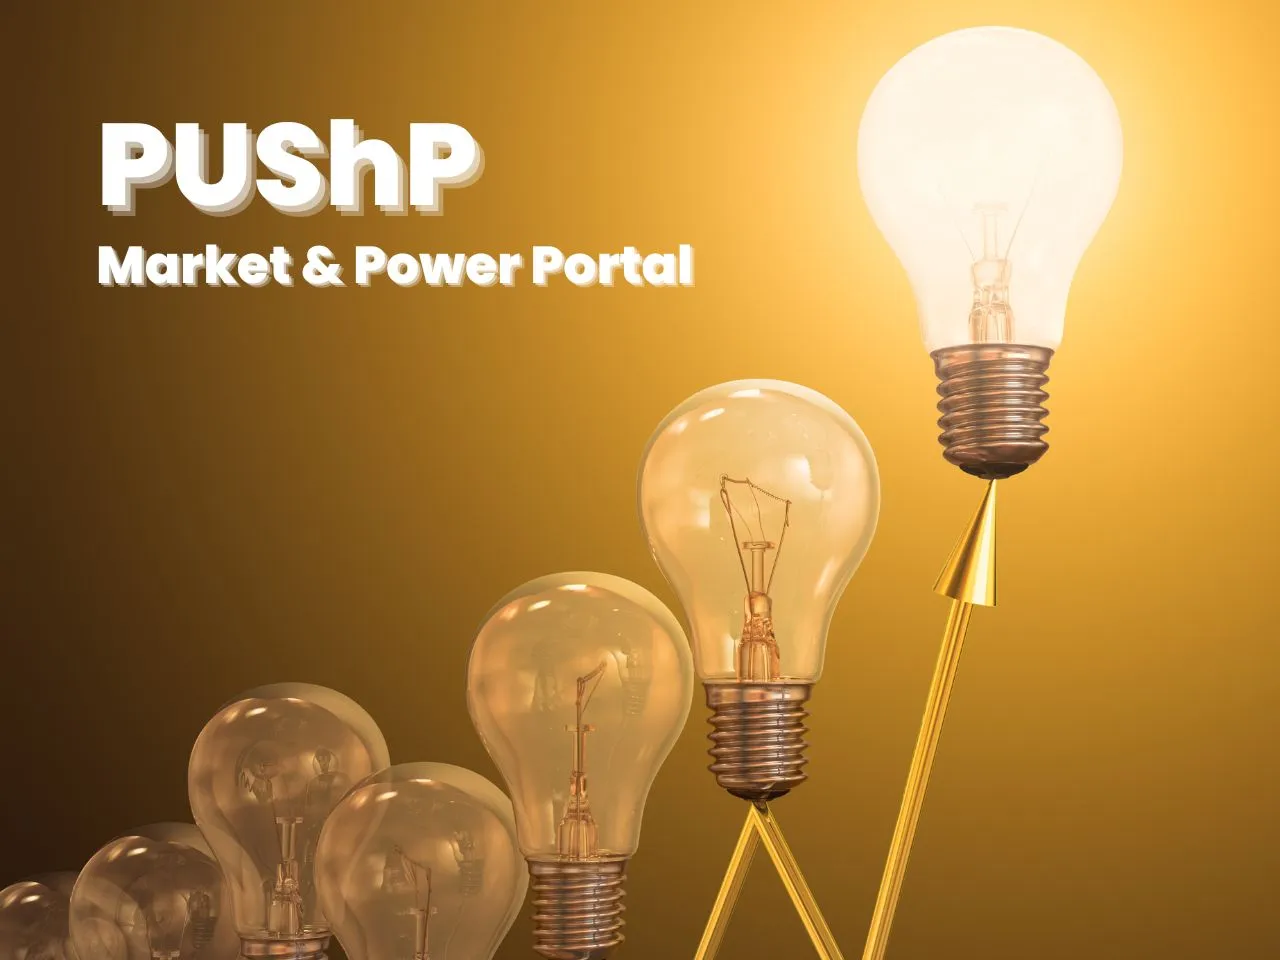 Govt Launches High Price Day Ahead Market & Power Portal (PUShP)